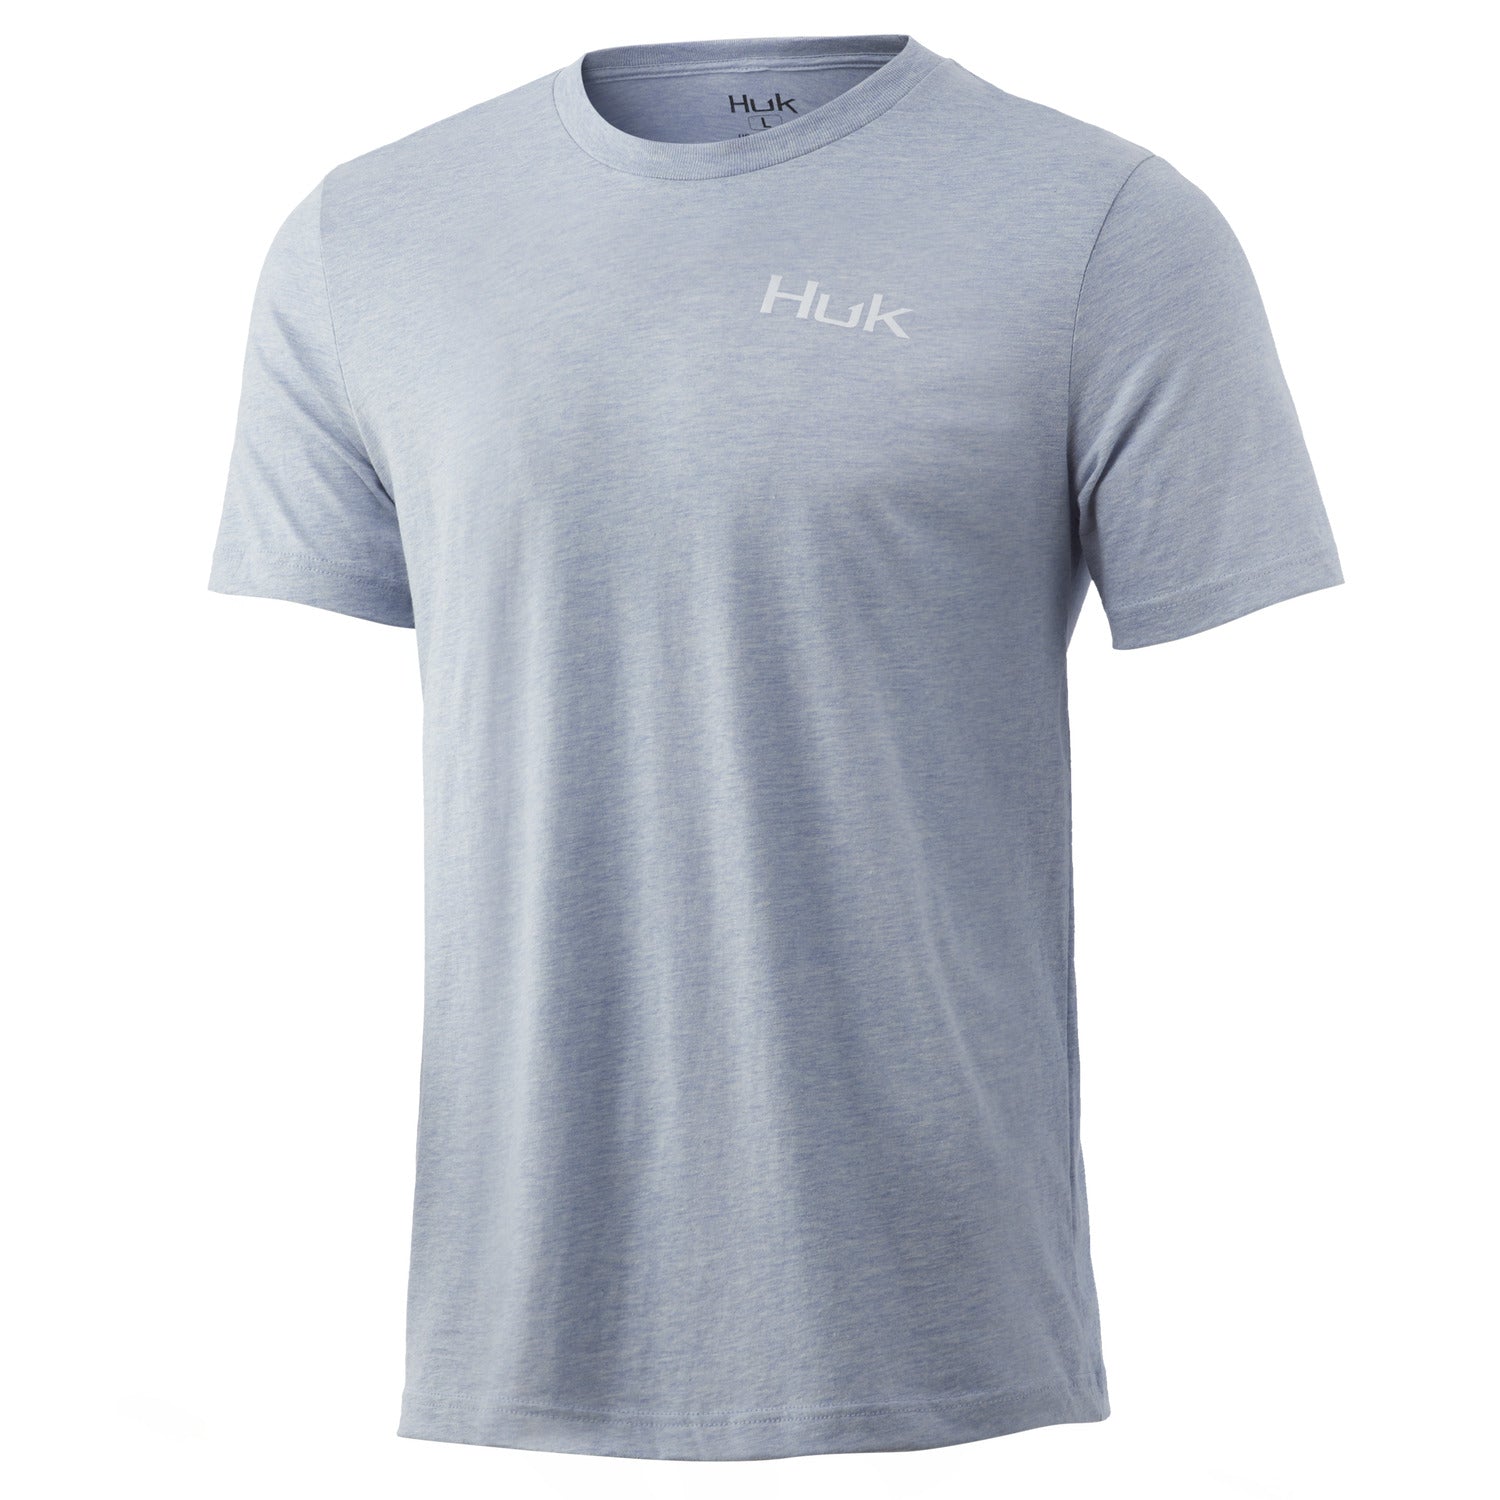 Huk KC Finger Mullet Feast Tee in Ice Blue Heather color from the front